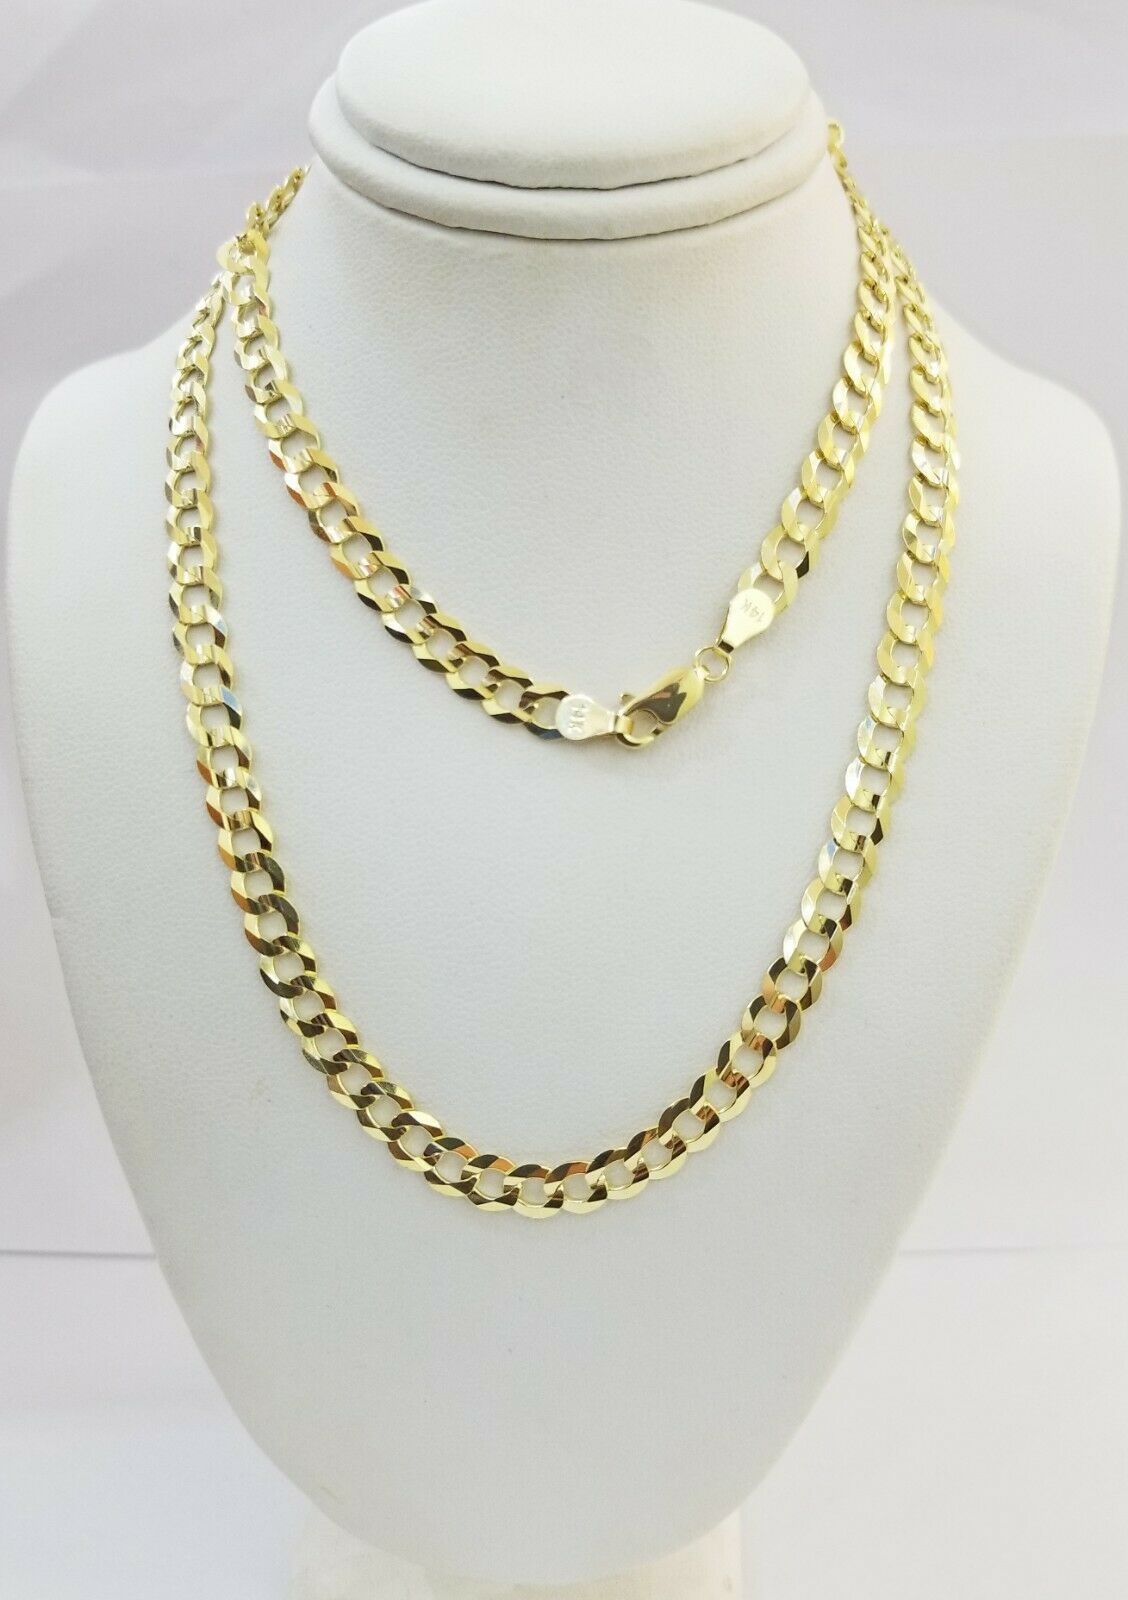 Solid 14K Yellow Gold Necklace Bracelet 3mm-10mm Curb Chain Cuban Link  7